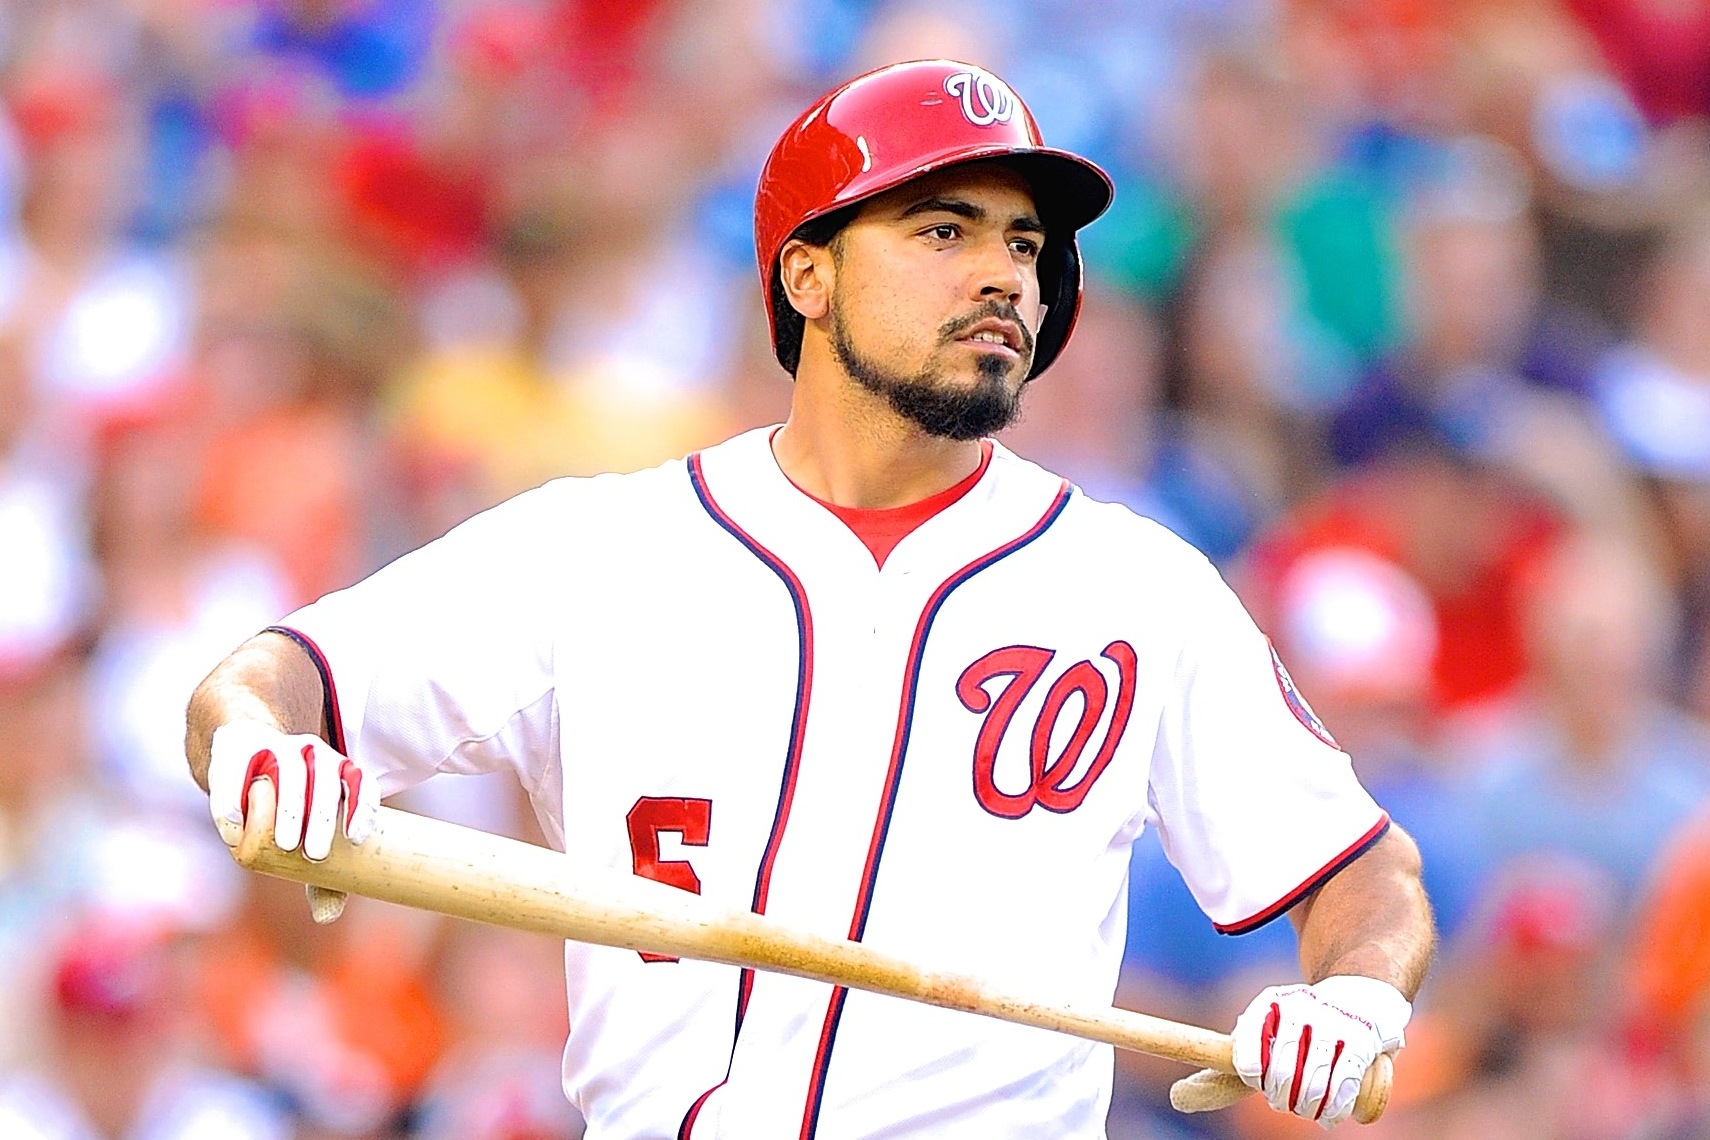 Anthony Rendon fan interaction video looked into by MLB - NBC Sports